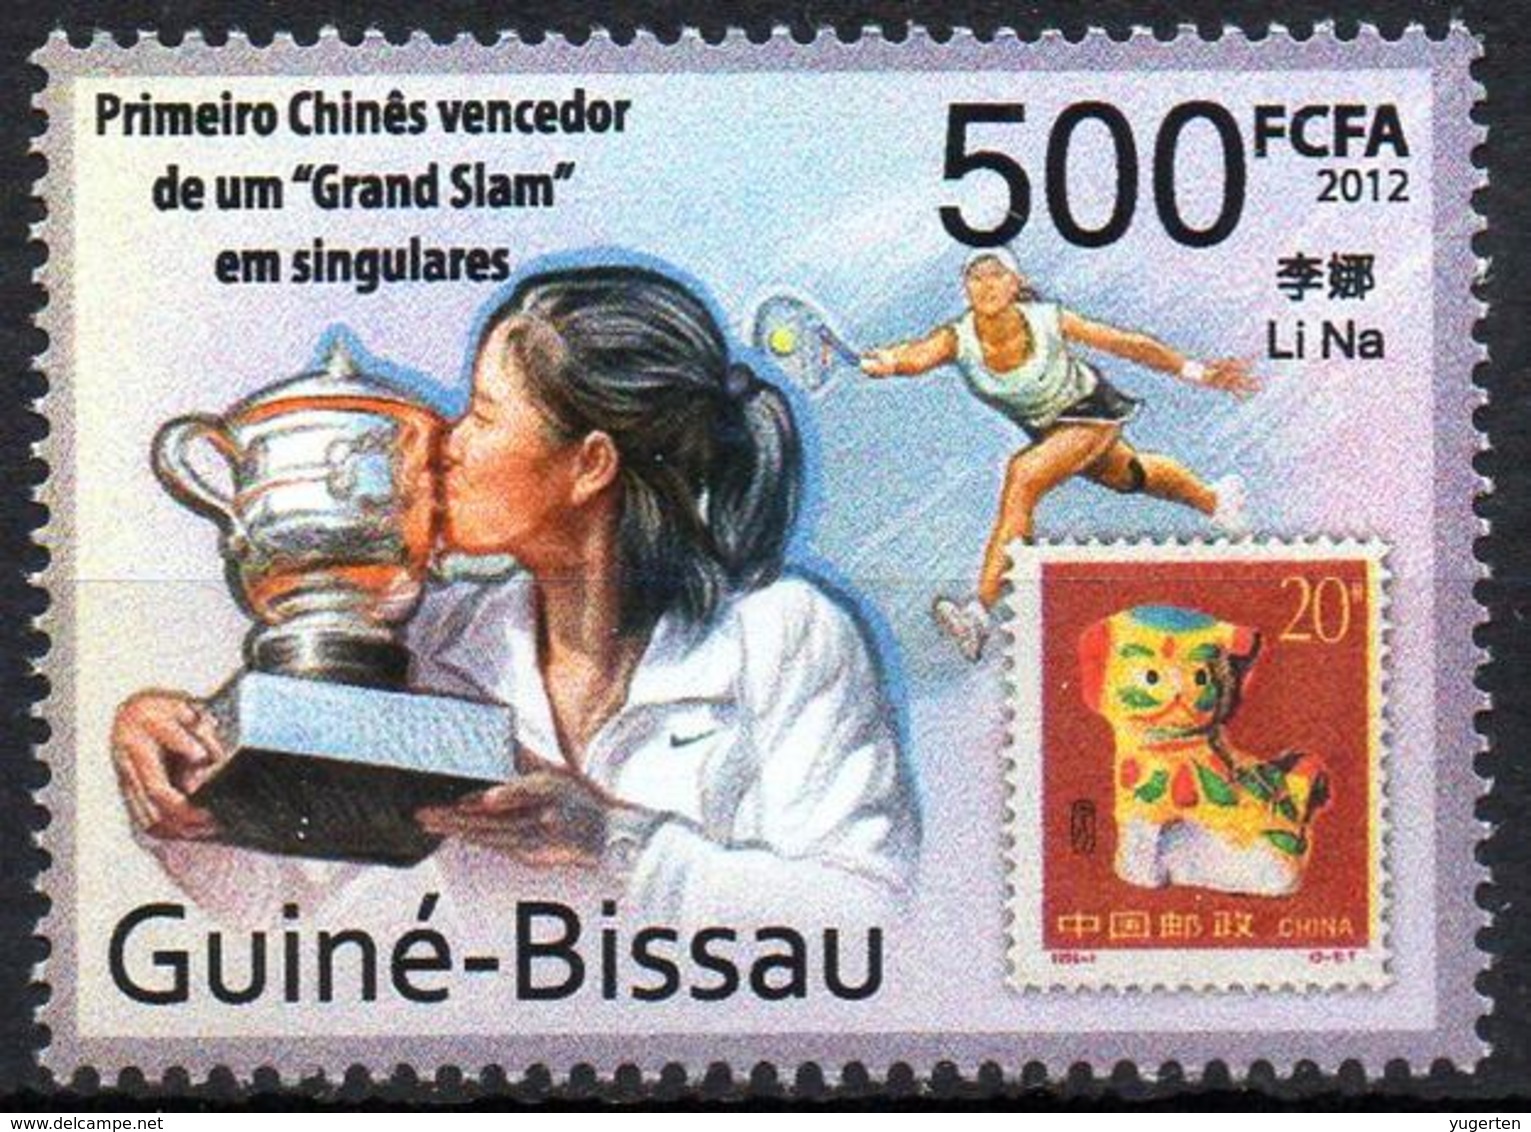 GUINEA BISSAU - 1v - MNH - Li Na - Tennis - Grand Slam - China - Chinese Player Stamps On Stamps - Timbres Sur Timbres - Tennis